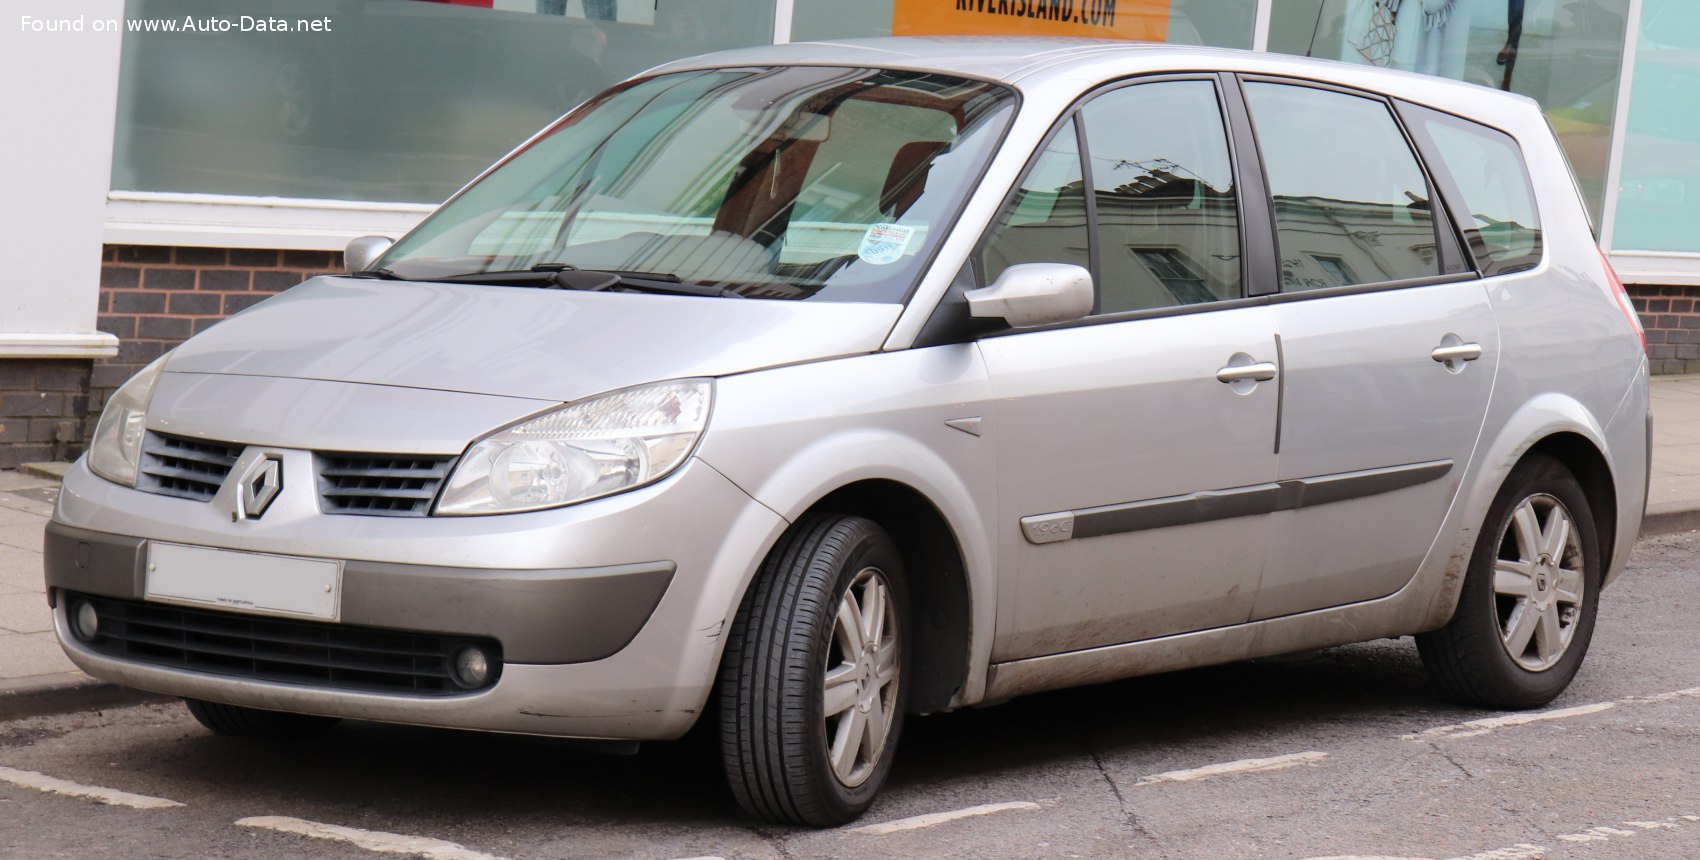 Renault Scenic Specifications - Dimensions, Configurations